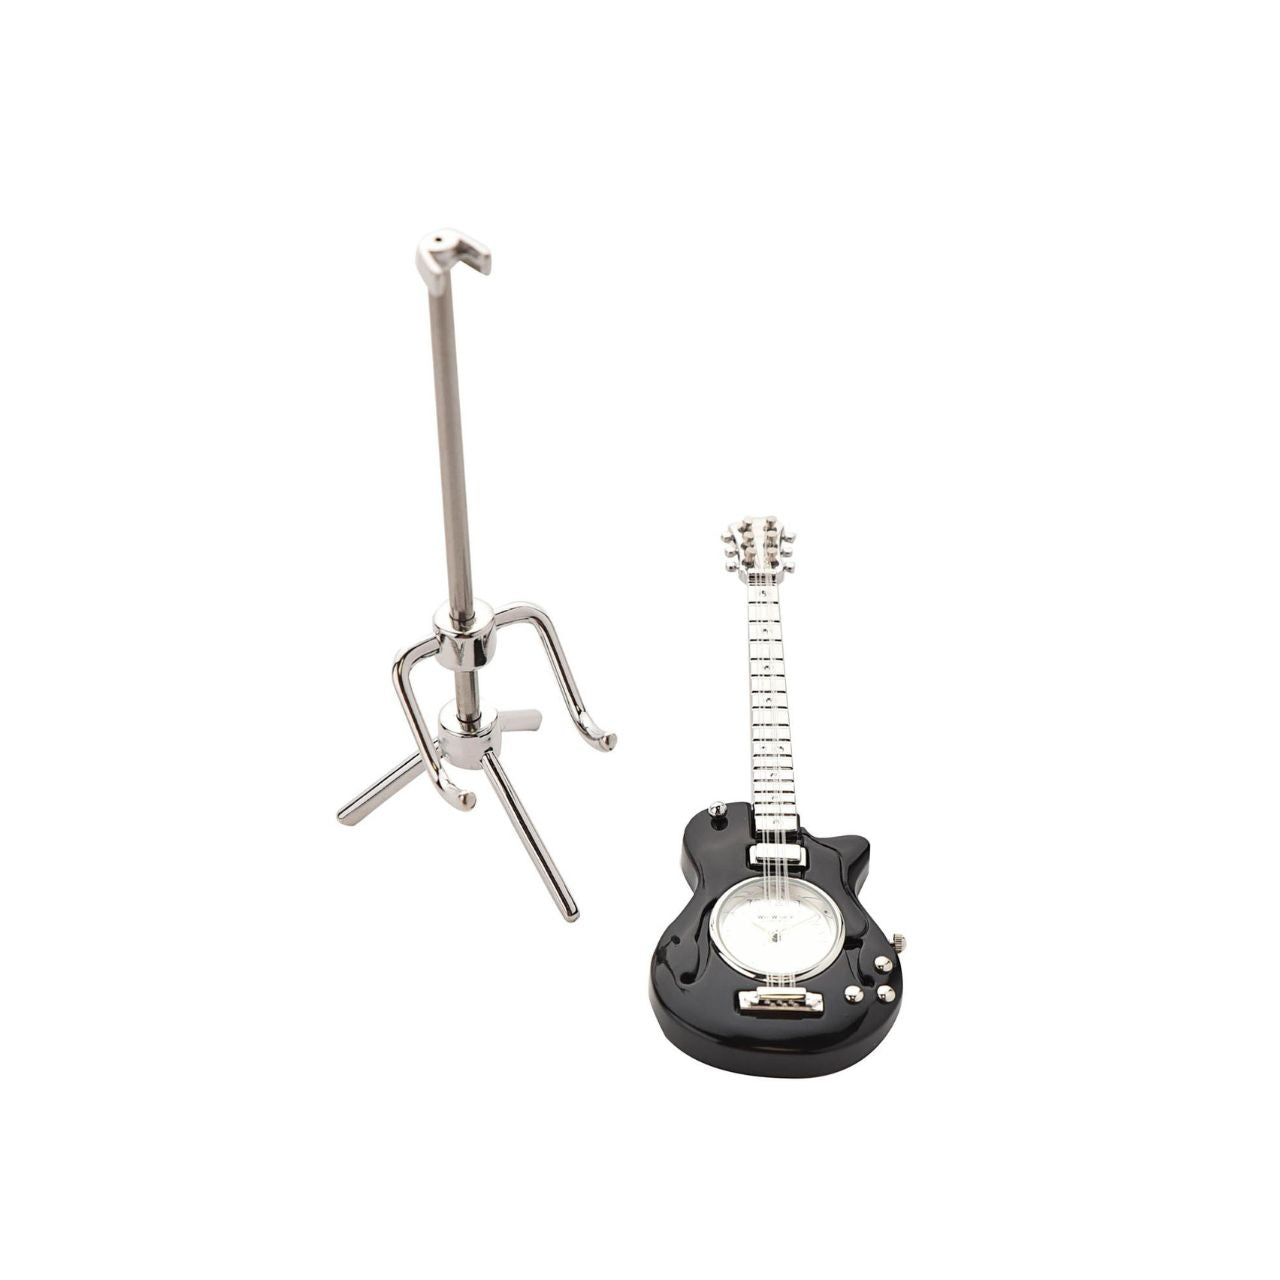 This dazzling guitar clock has a lasting style that would complement any bedside table or living room mantelpiece.